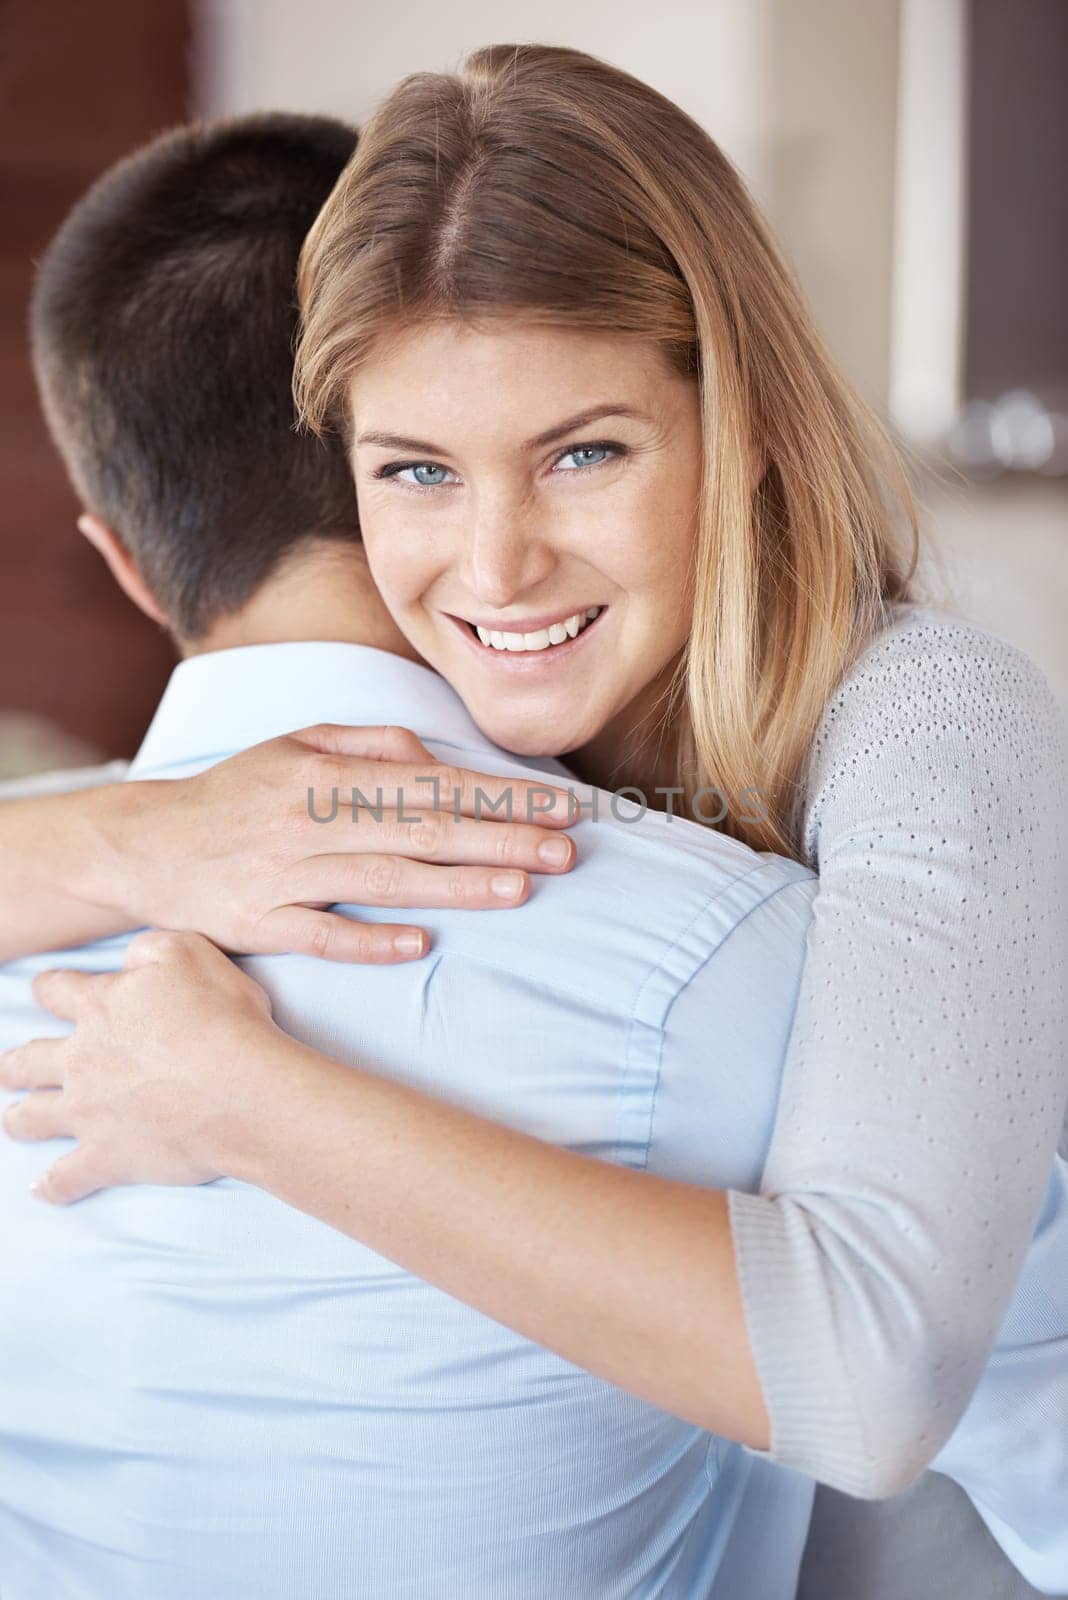 Nothing better than a morning hug from my husband. Portrait of a smiling woman hugging her boyfriend